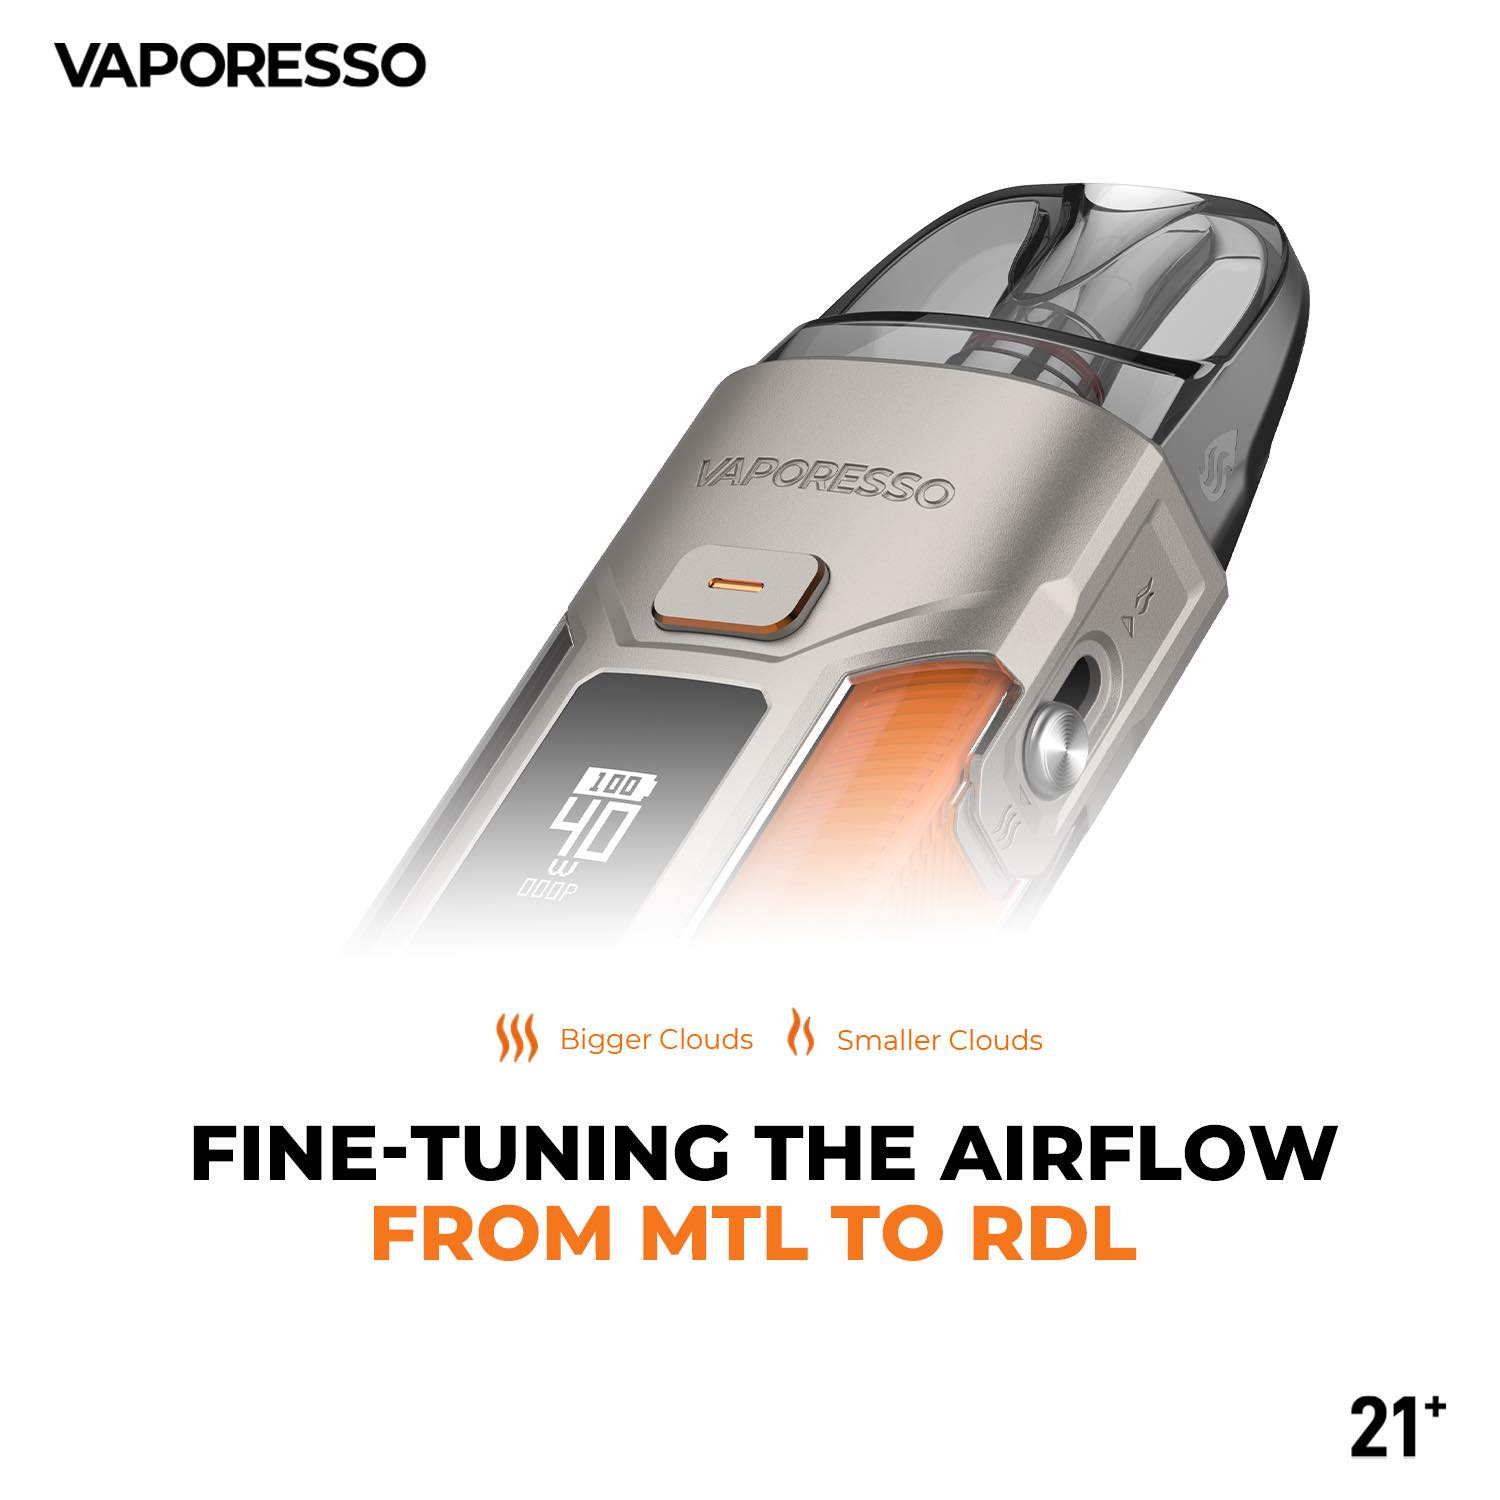 Vaporesso Vaping Chronicles: A User’s Journey Through Flavorful Cloud Adventures